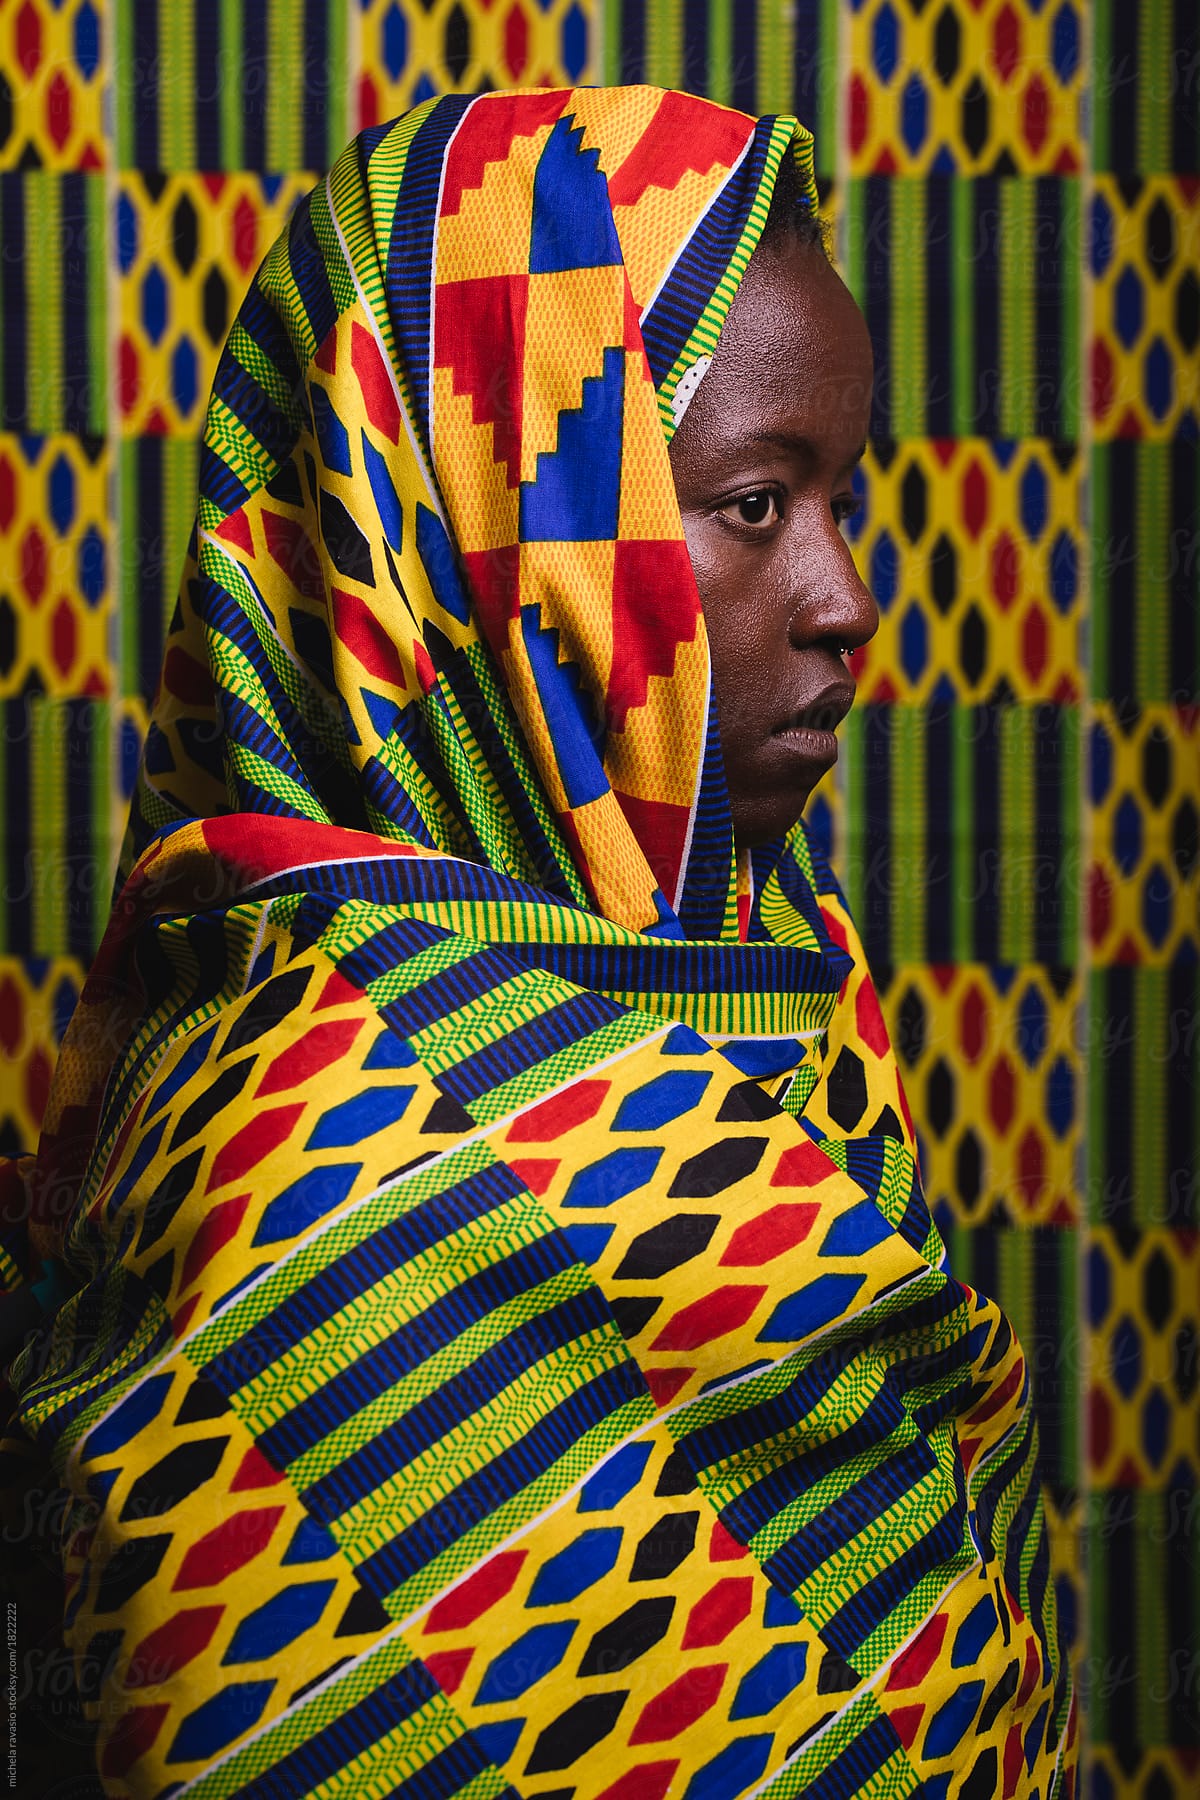 Profile of a young woman wearing a colored cloth